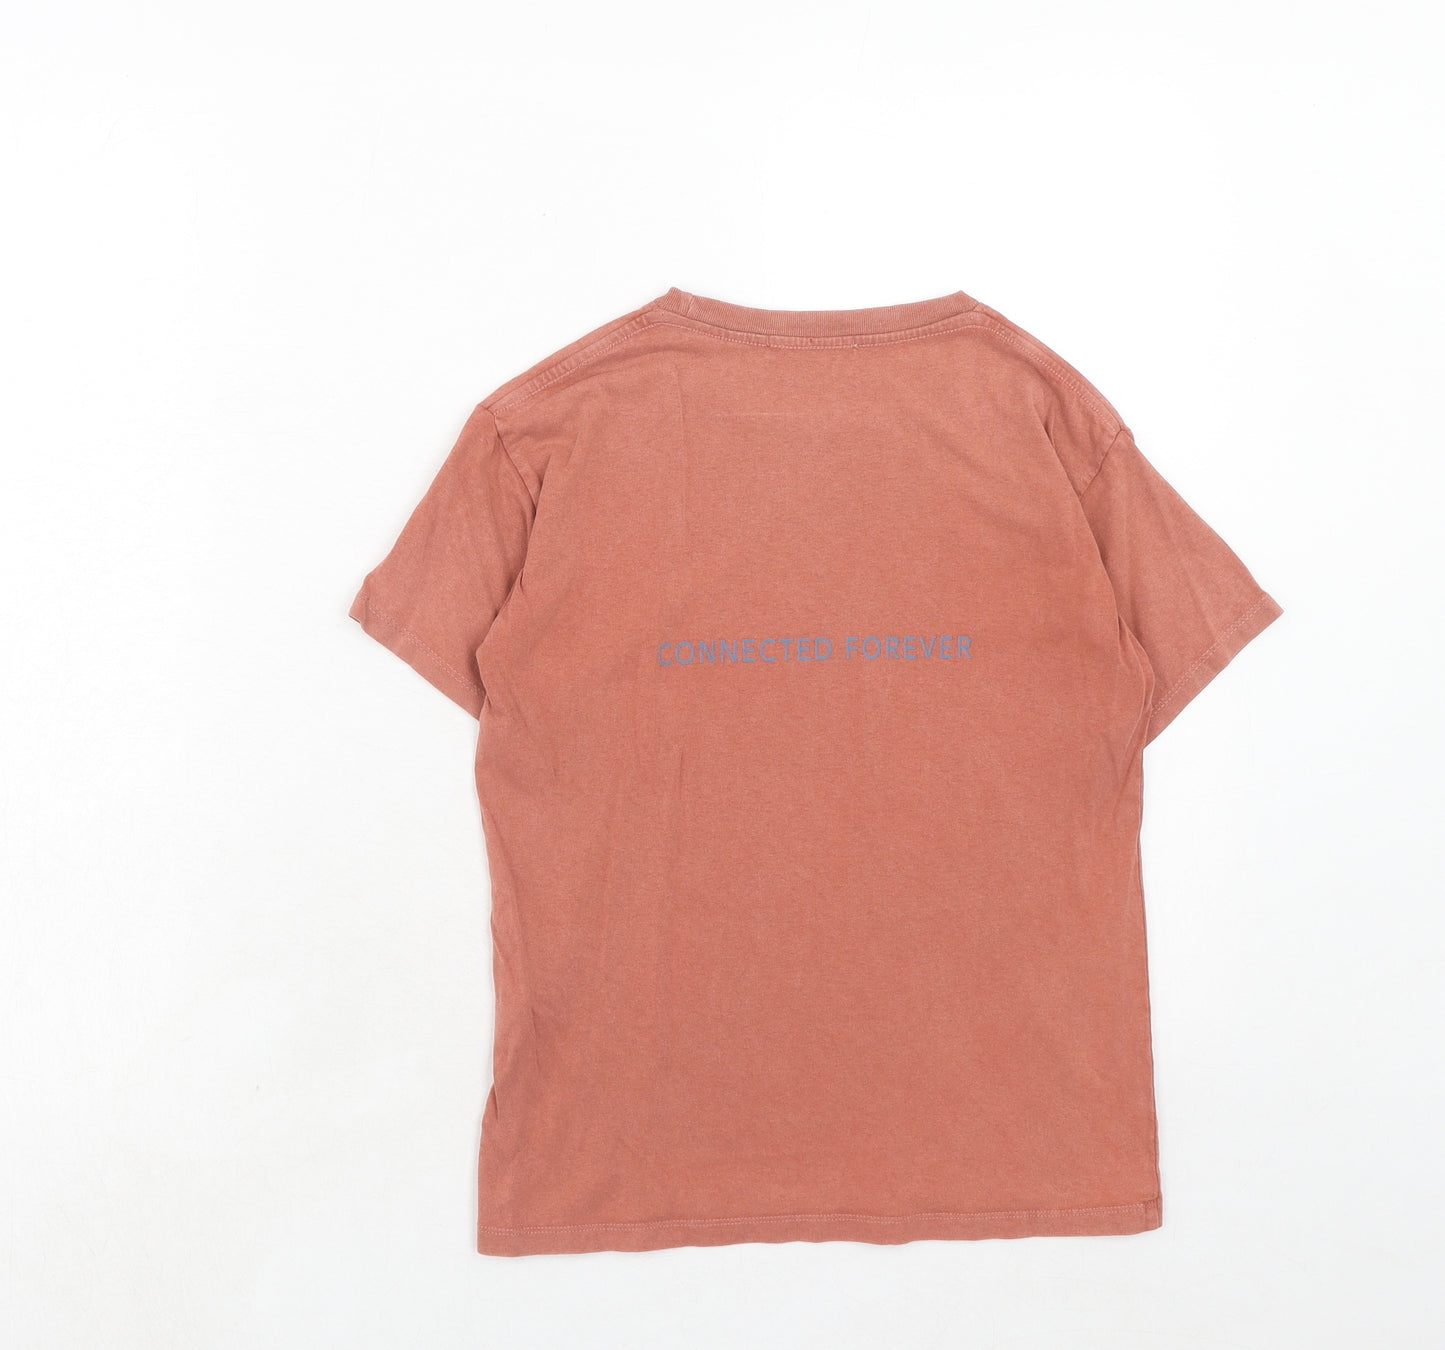 Zara Boys Orange Cotton Pullover T-Shirt Size 8 Years Round Neck Pullover - All Generations